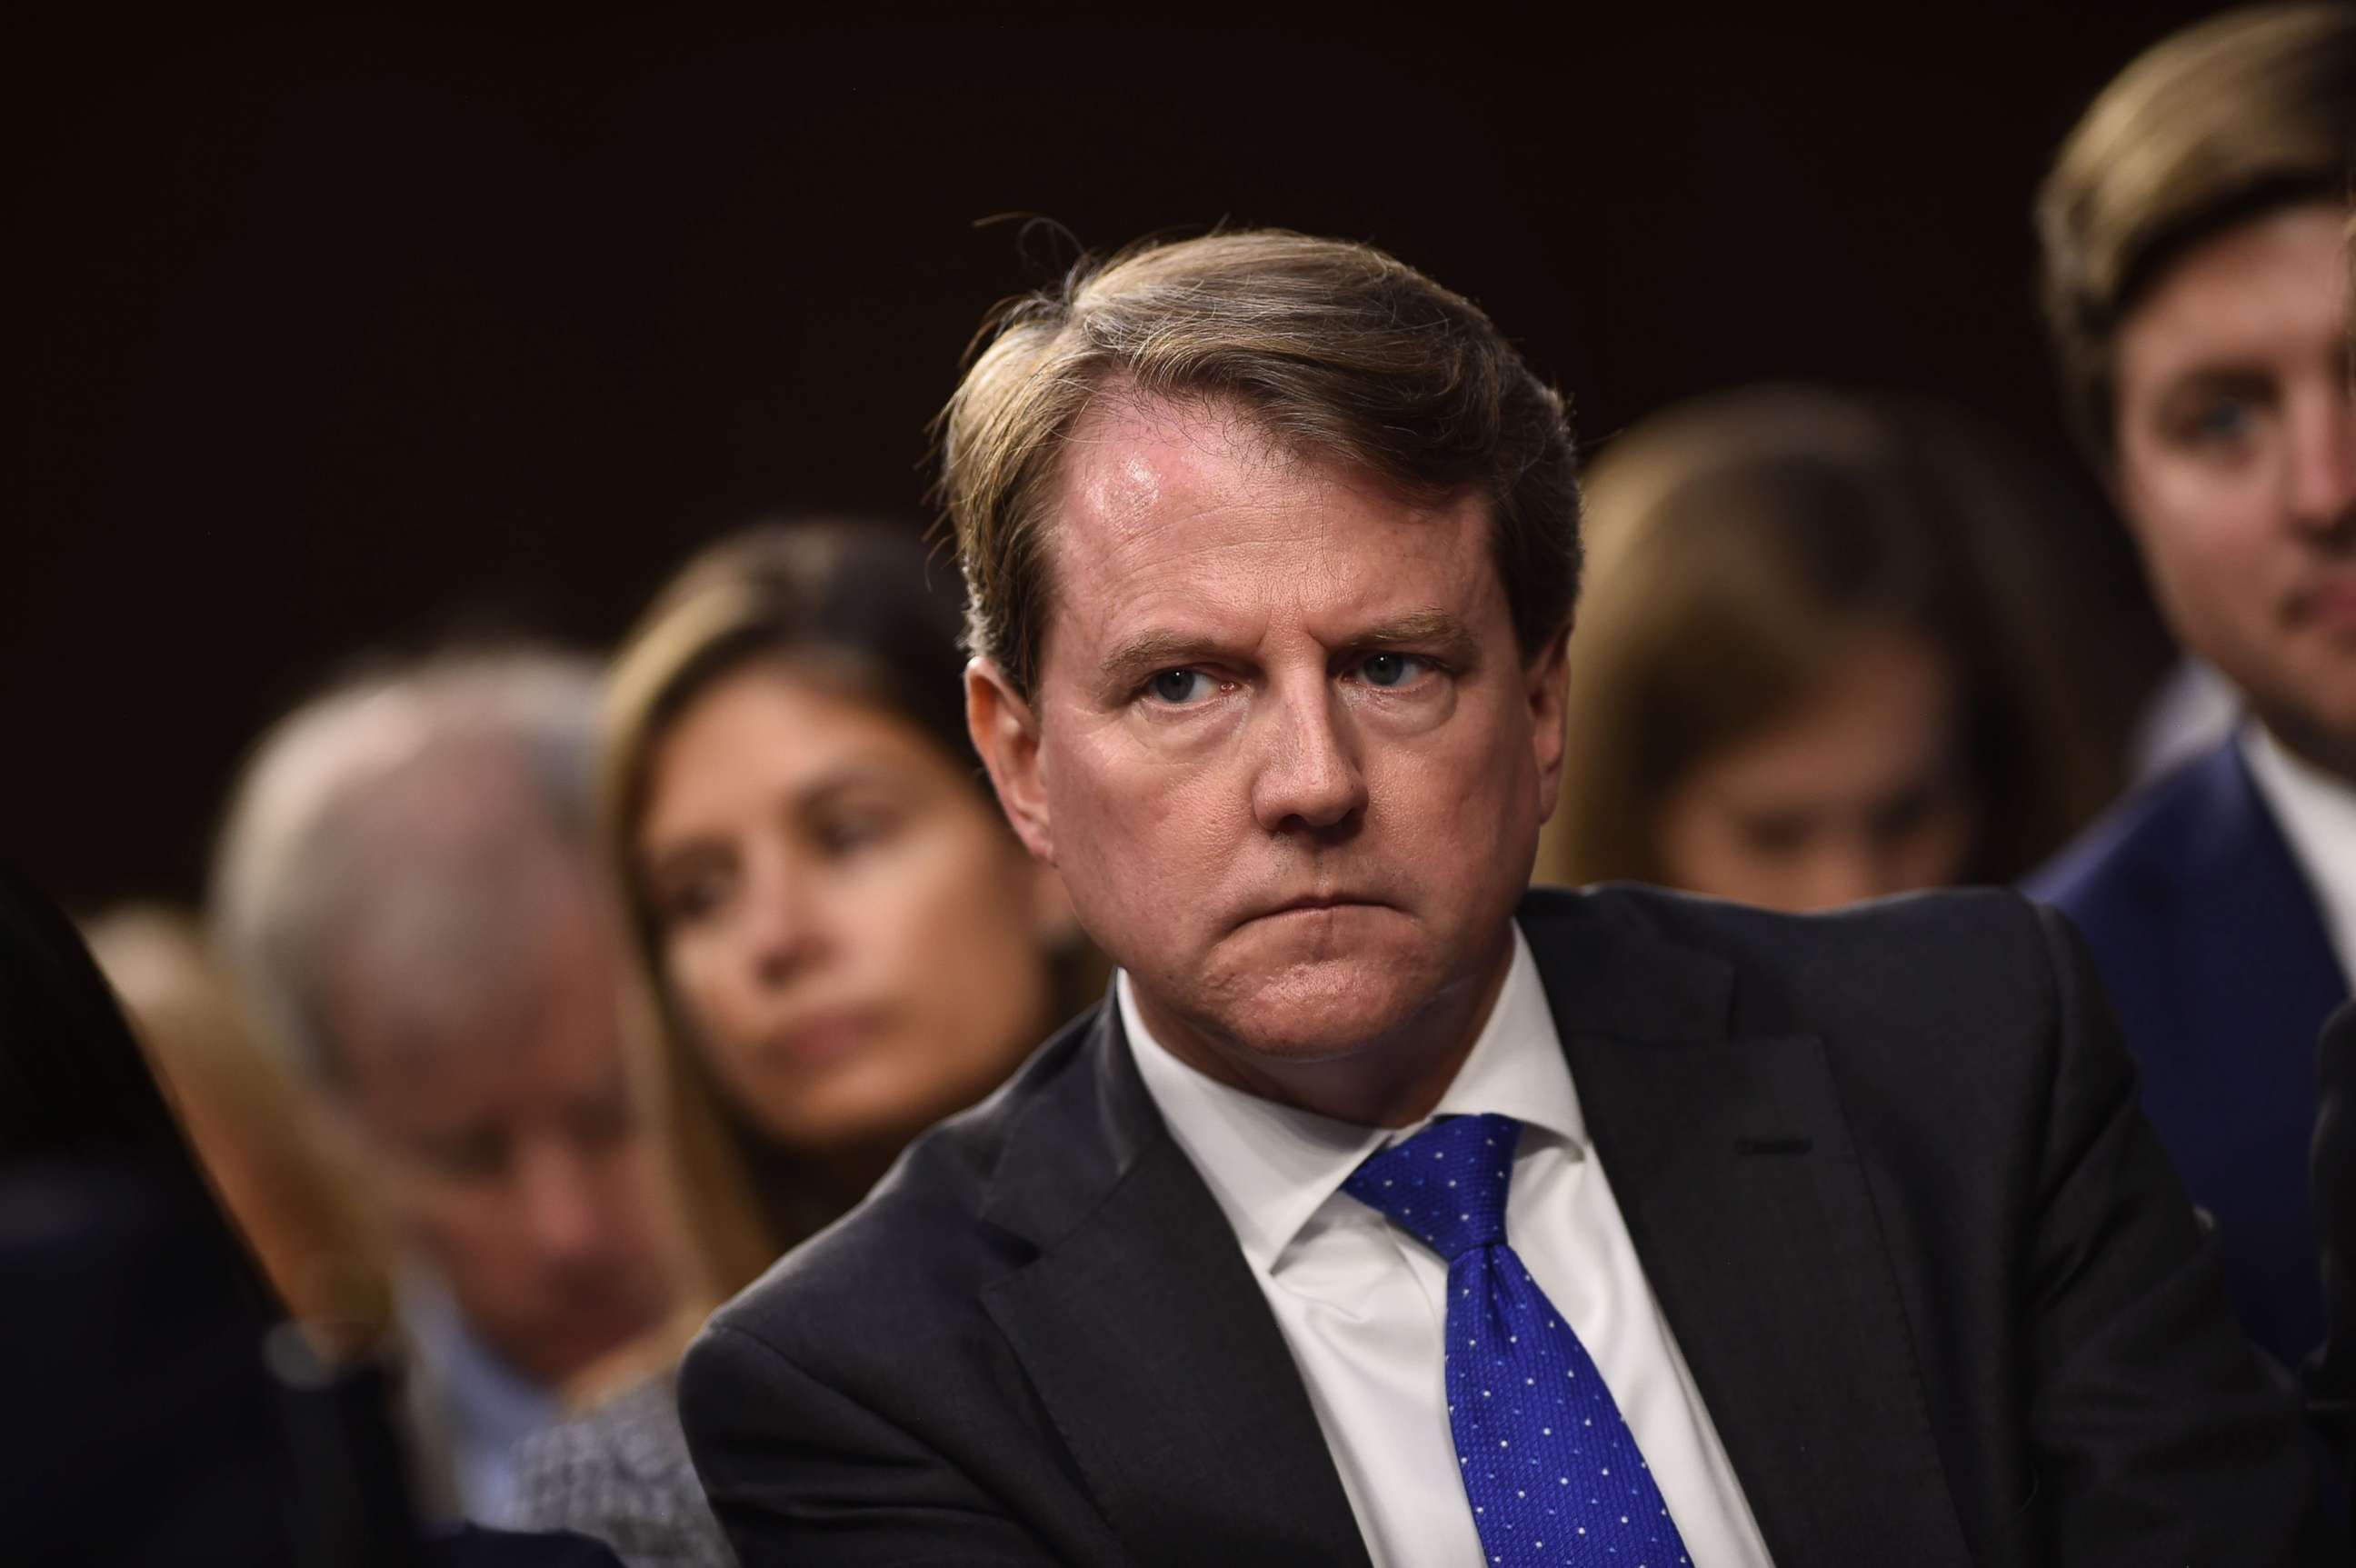 PHOTO: White House Counsel Don McGahn listens during a Senate Judiciary Committee hearing in Washington, Sept. 4, 2018.